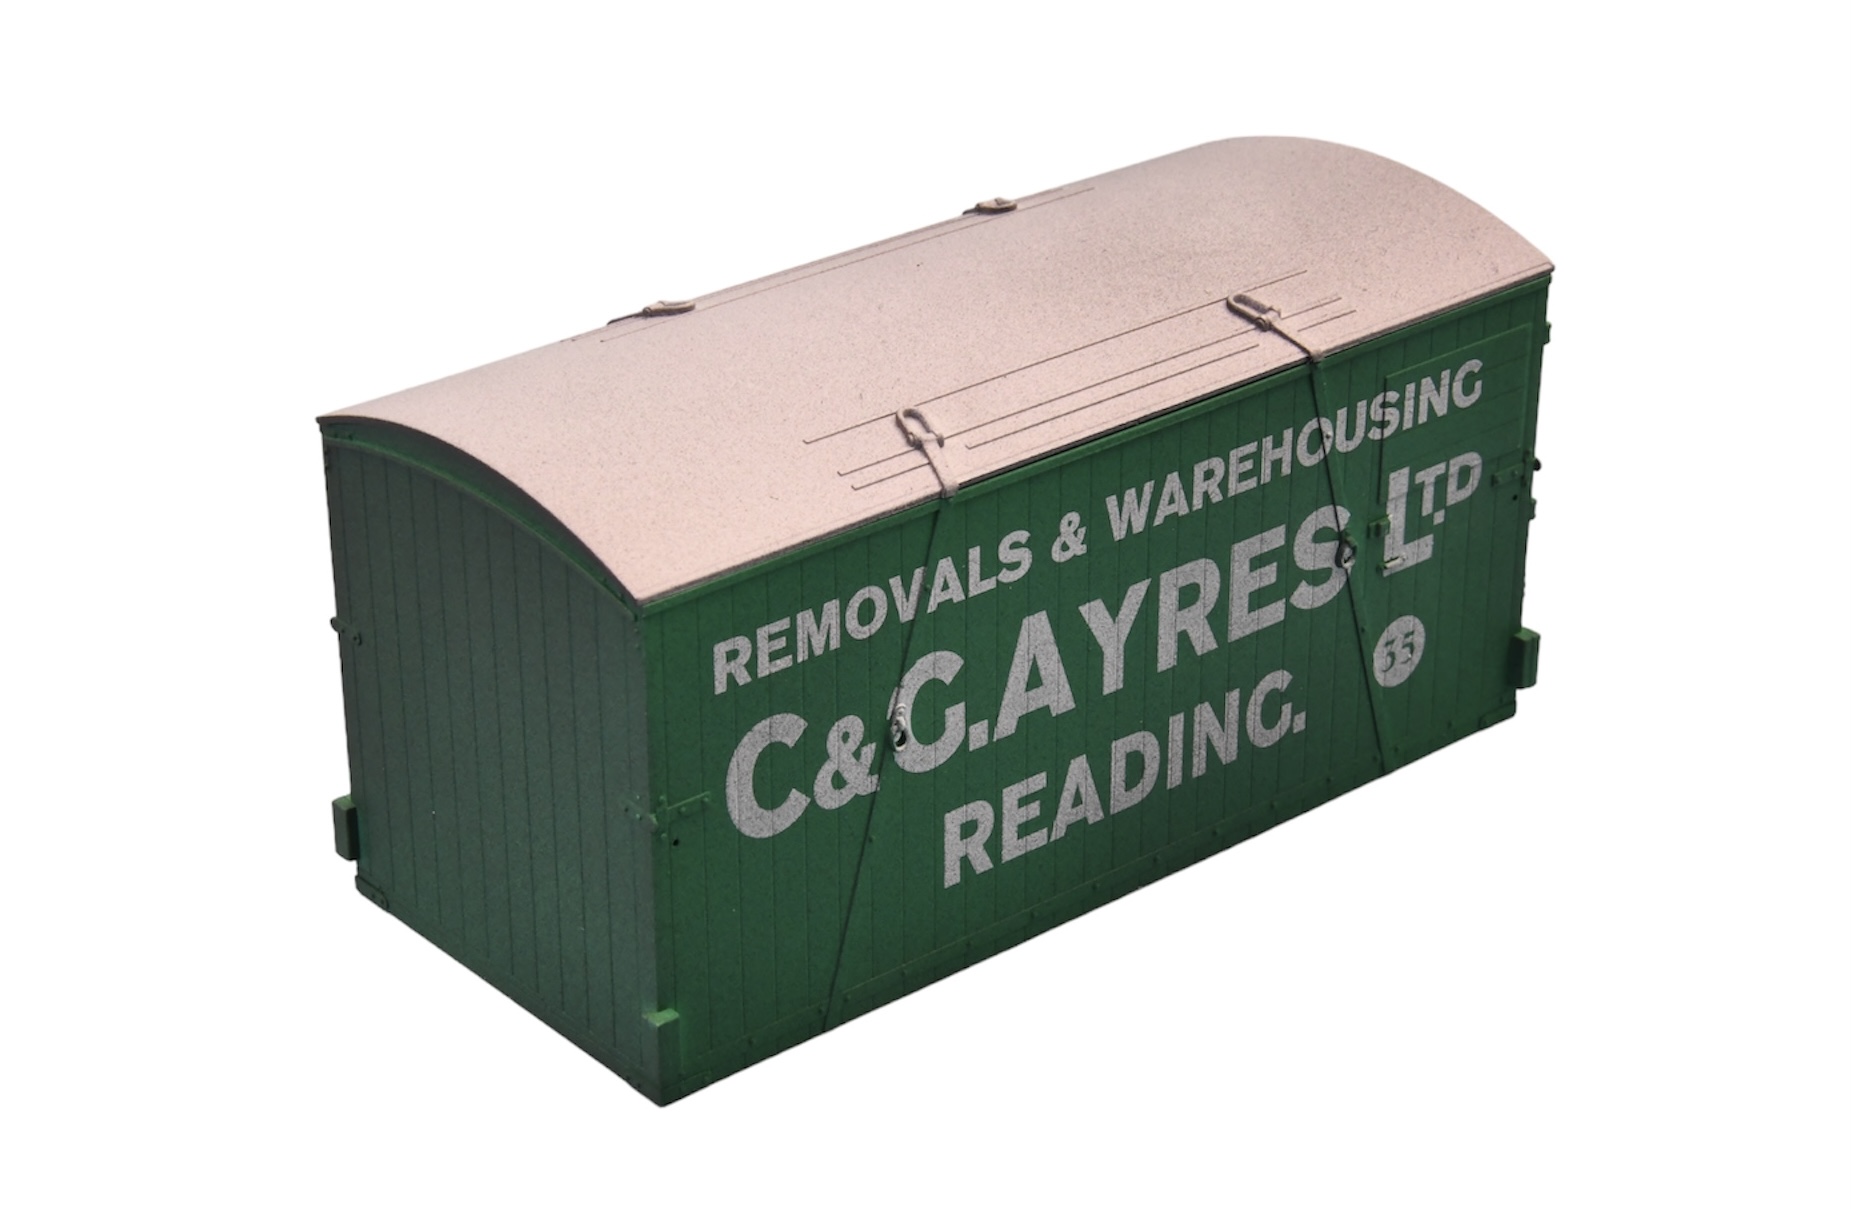 7F-037-016W CONTAINER C & G AYRES 35 Wthd